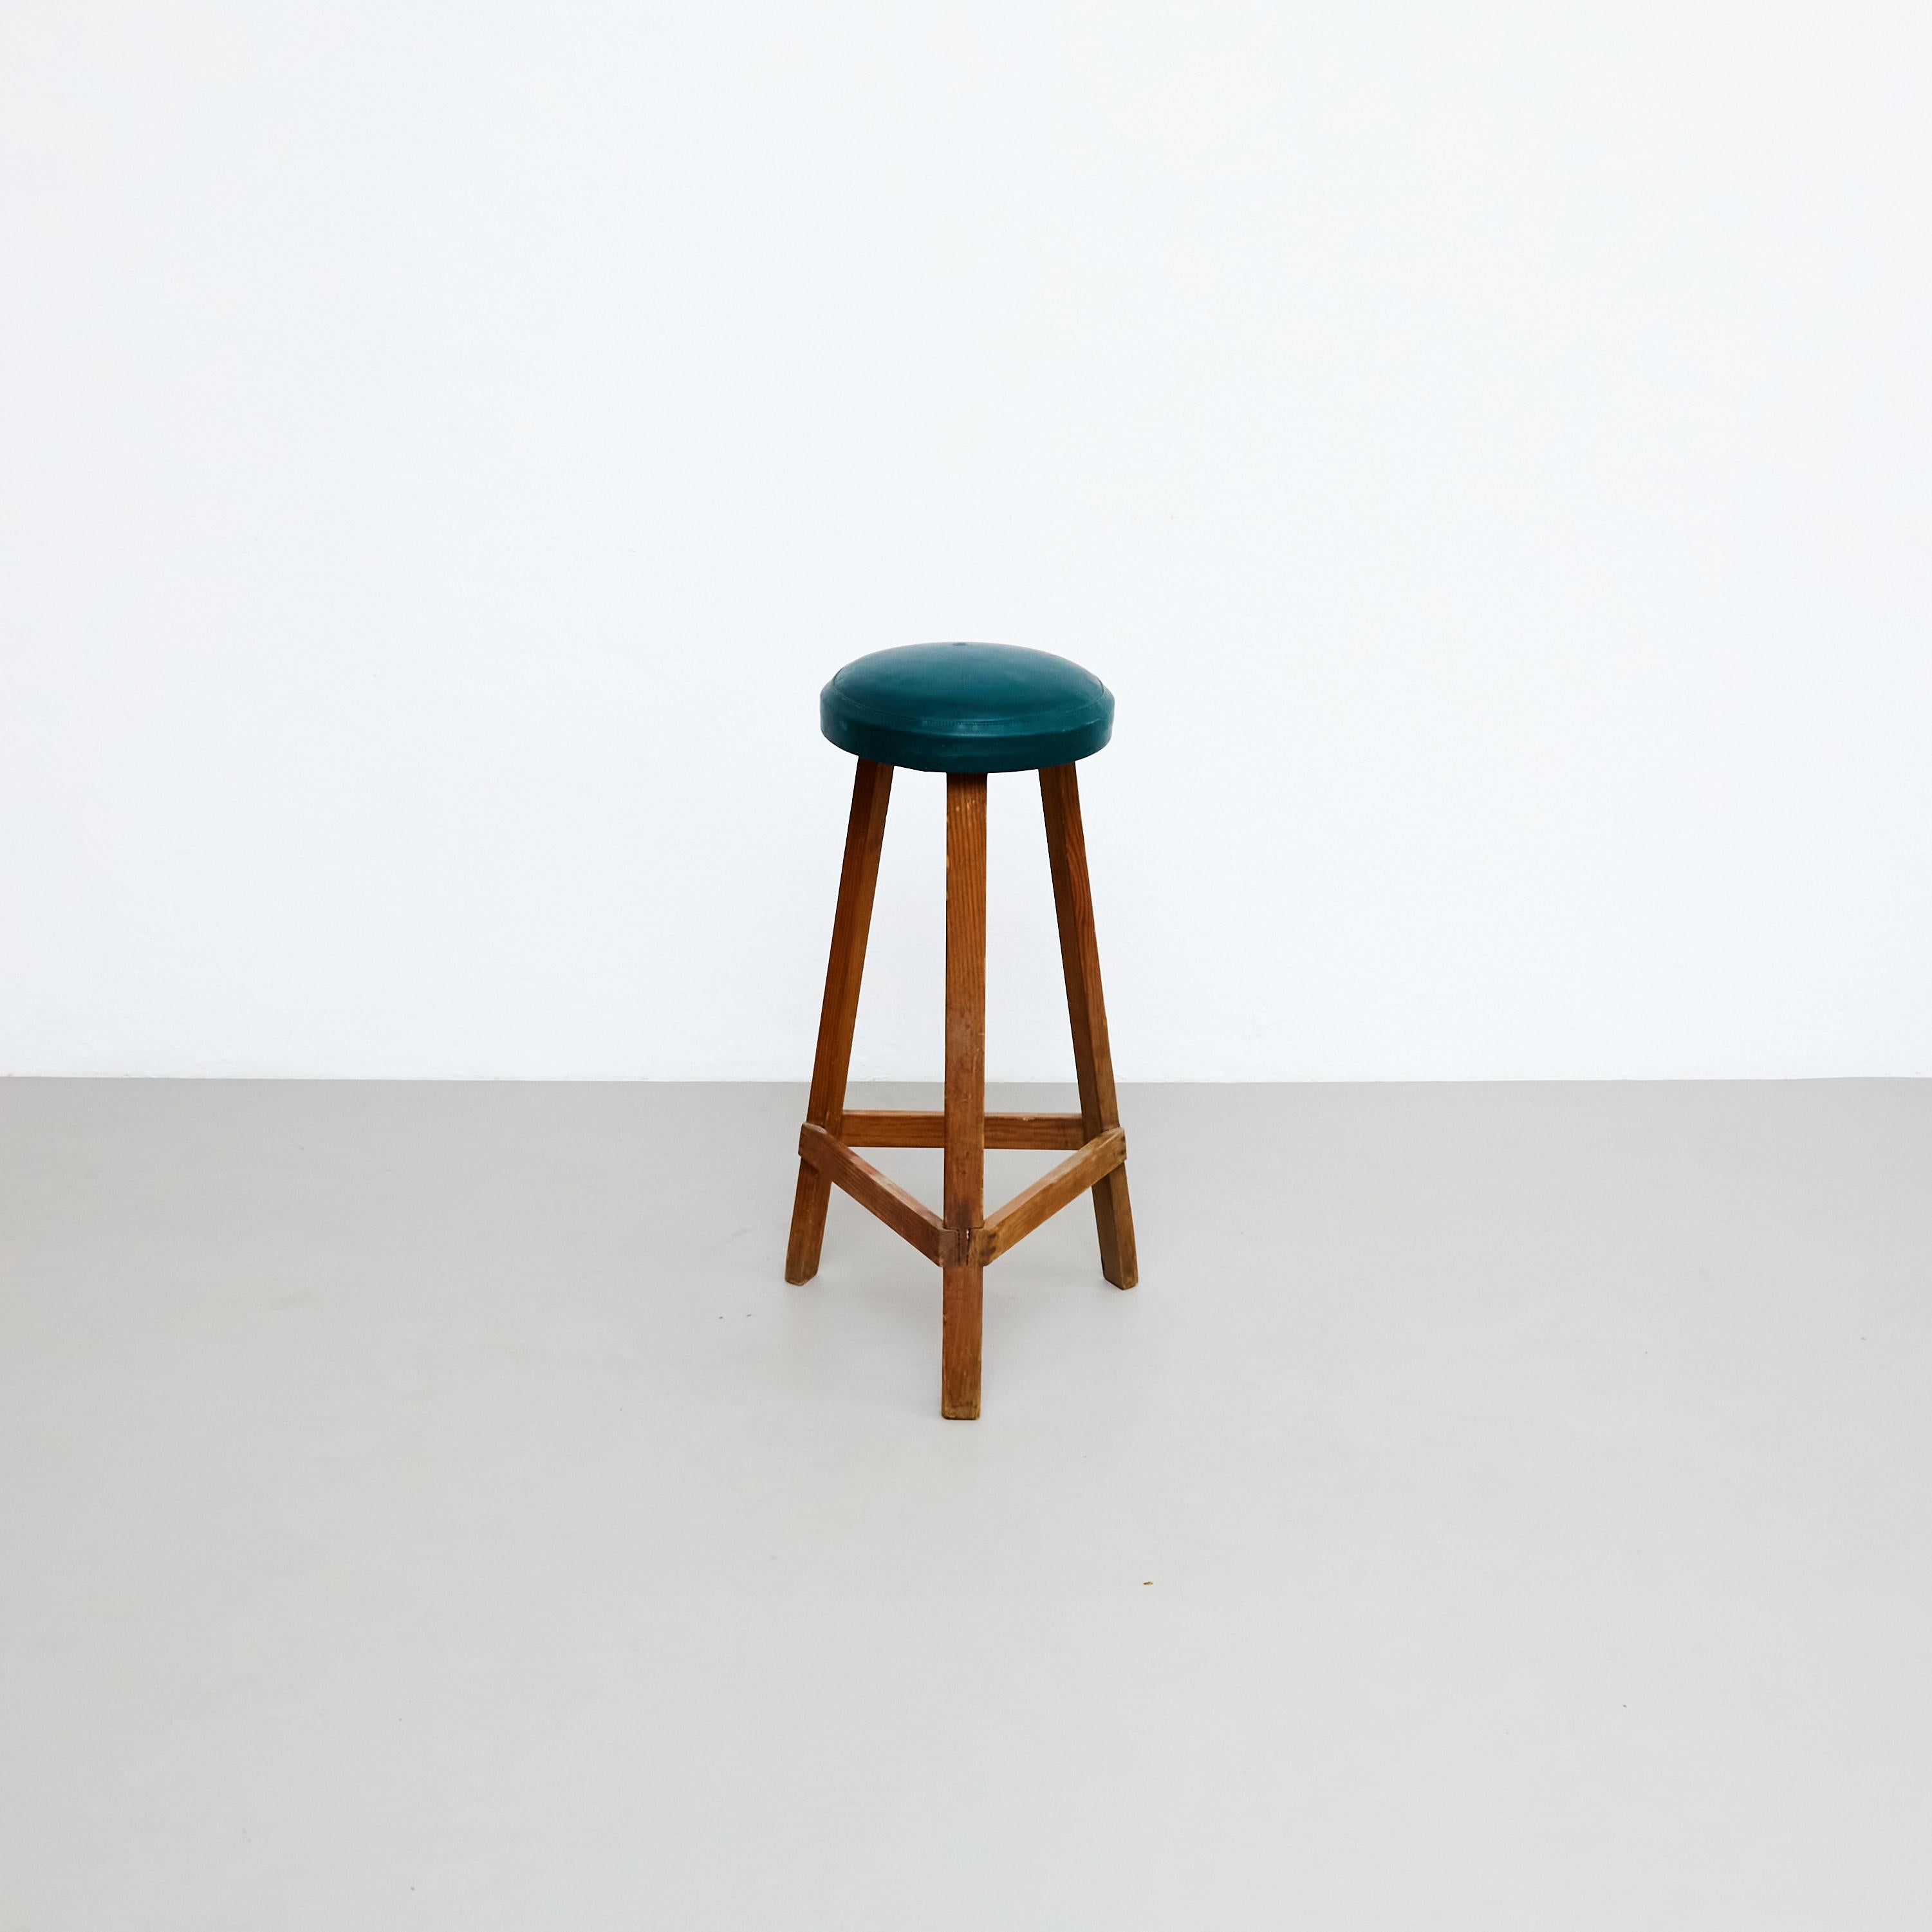 Mid-Century Modern Rationalist wood high stool, by unknown designer.

Manufactured in France, circa 1950.

In original condition with minor wear consistent of age and use, preserving a beautiful patina.

Materials: 
Wood 

Dimensions: 
D